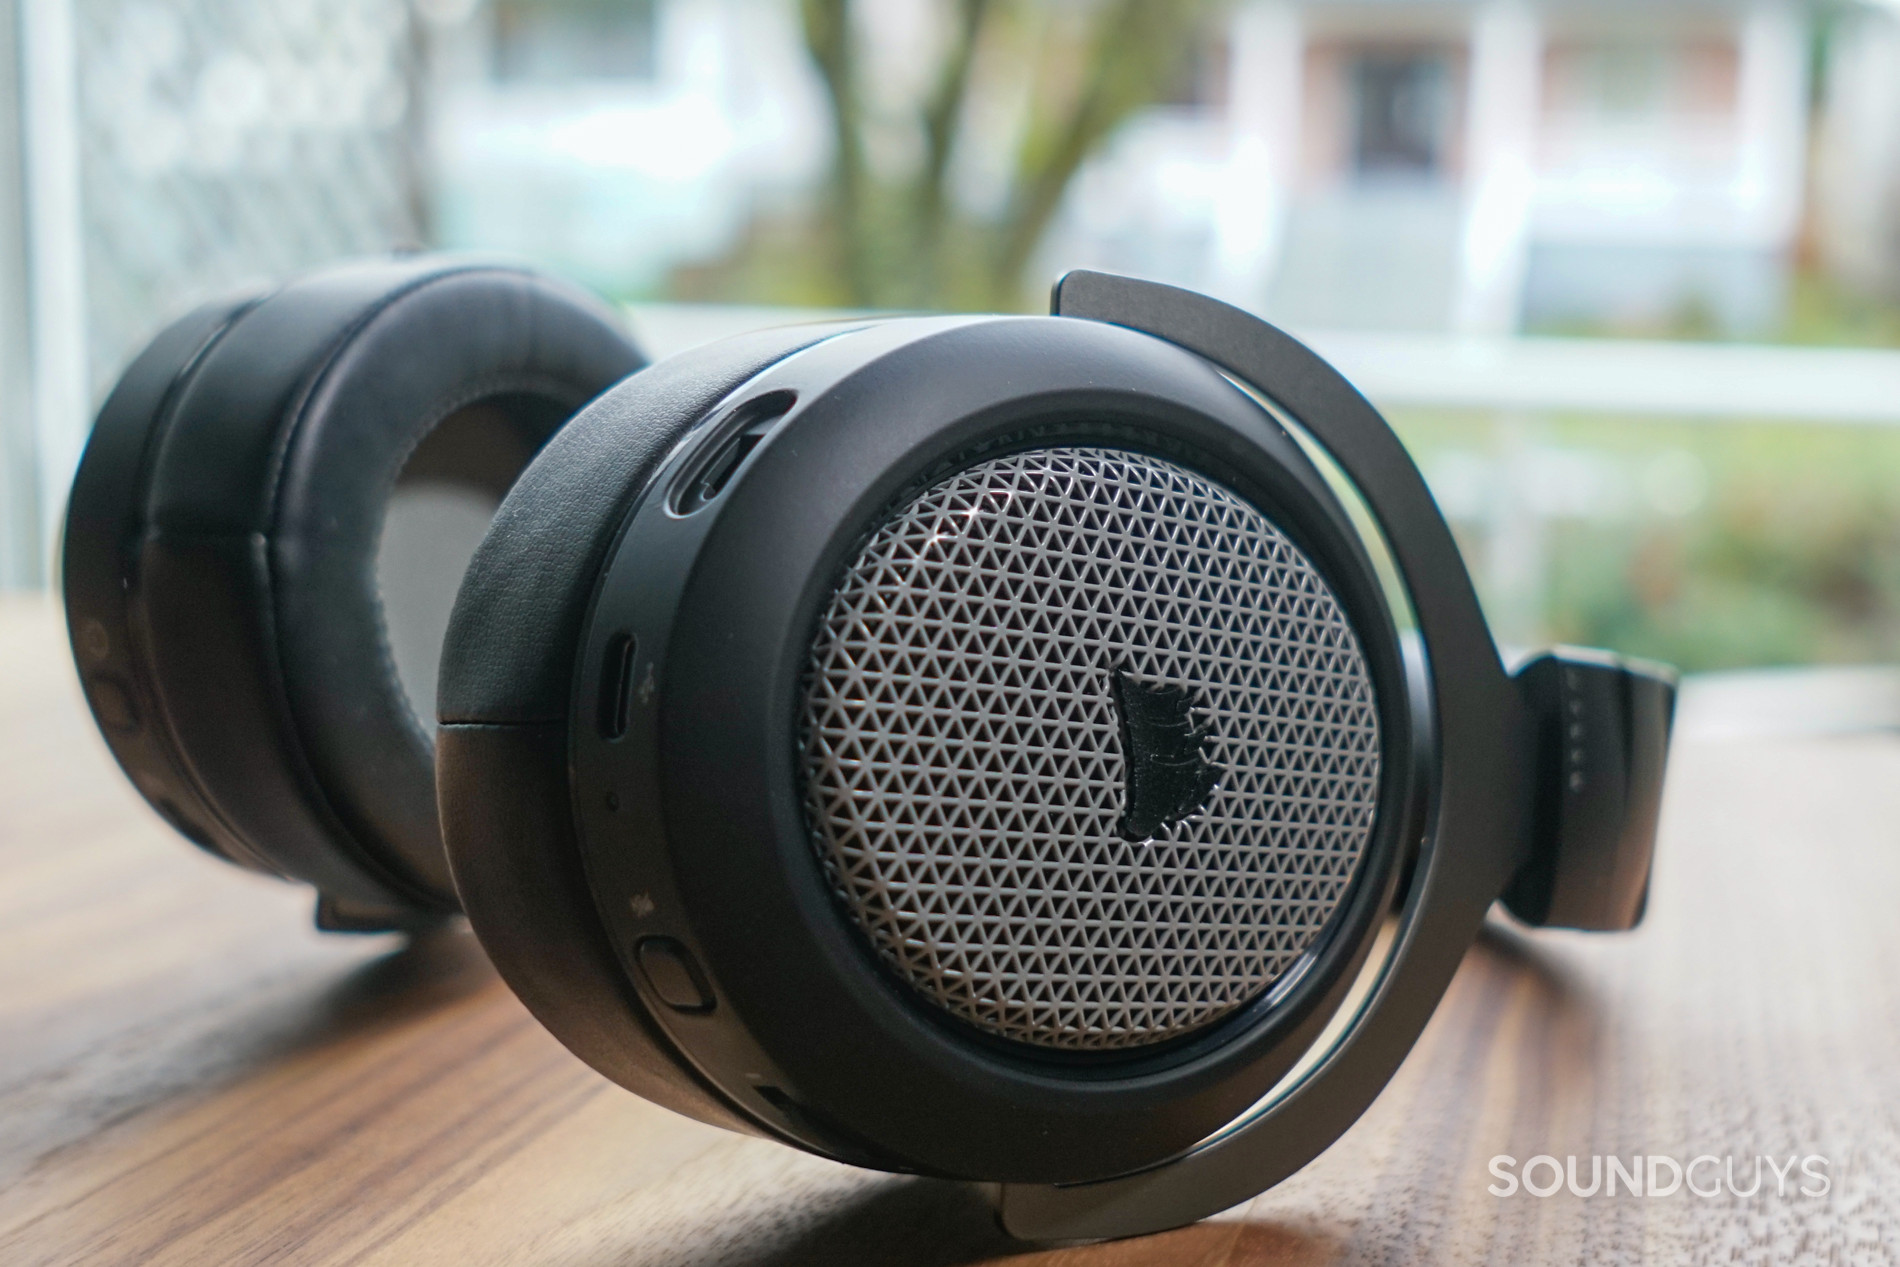 The Corsair HS75 XB Wireless lays on a table with its mic unplugged and controls visible.